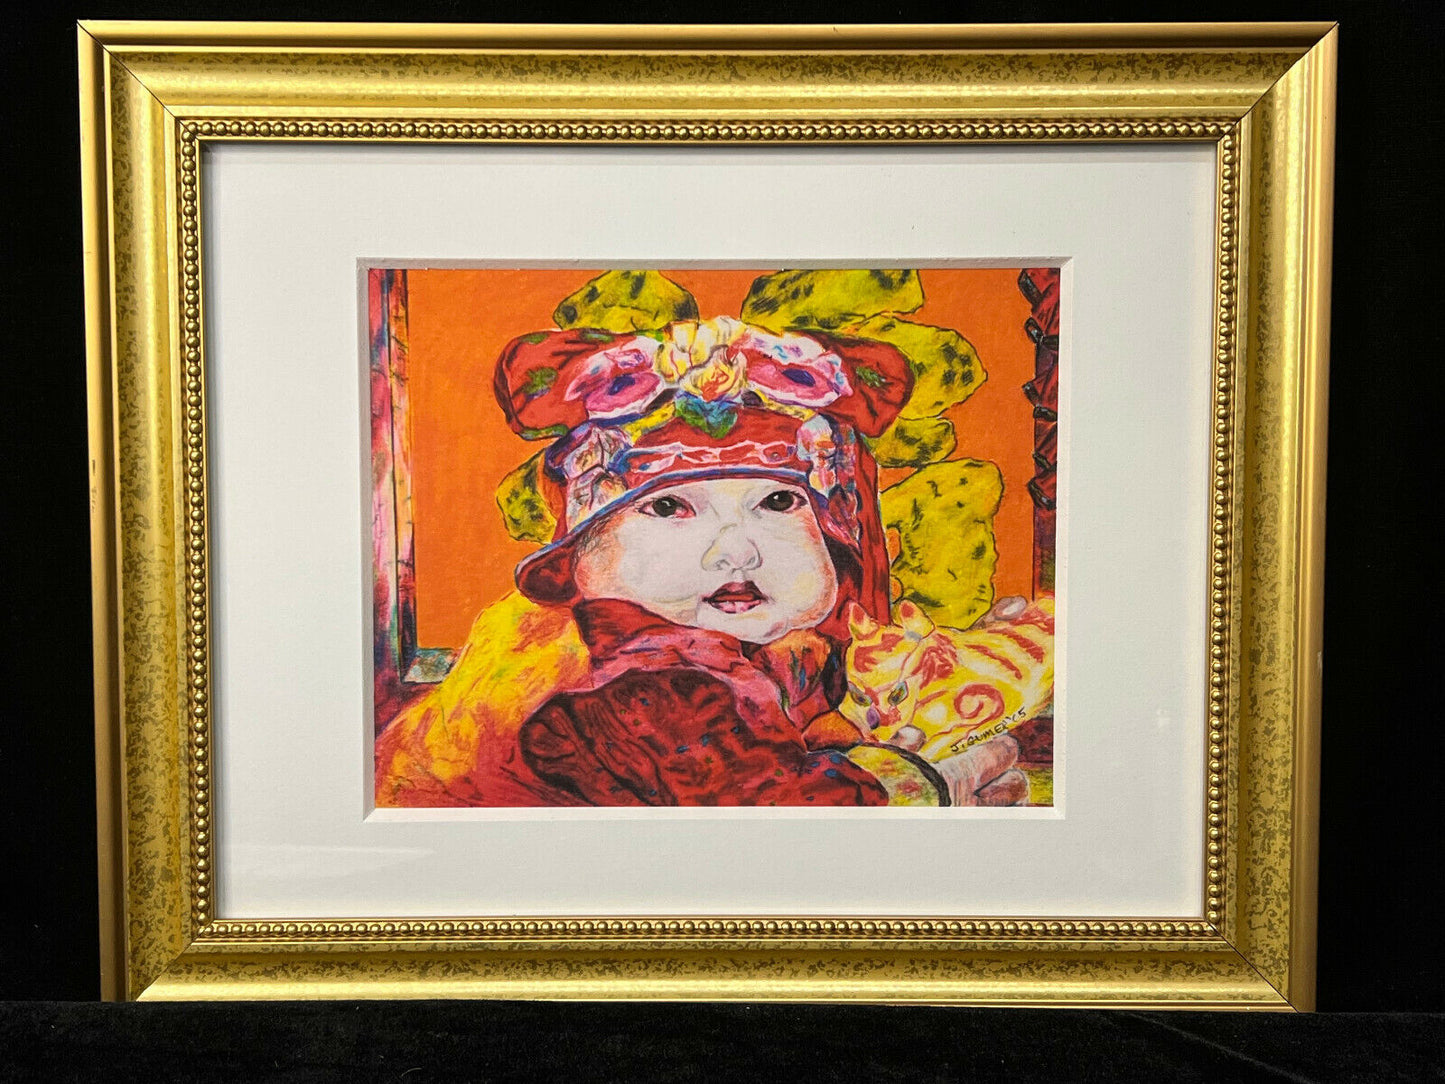 Framed Print of Baby with Colorful Bows by J. Gumer 16.5" x 13.5" Framed